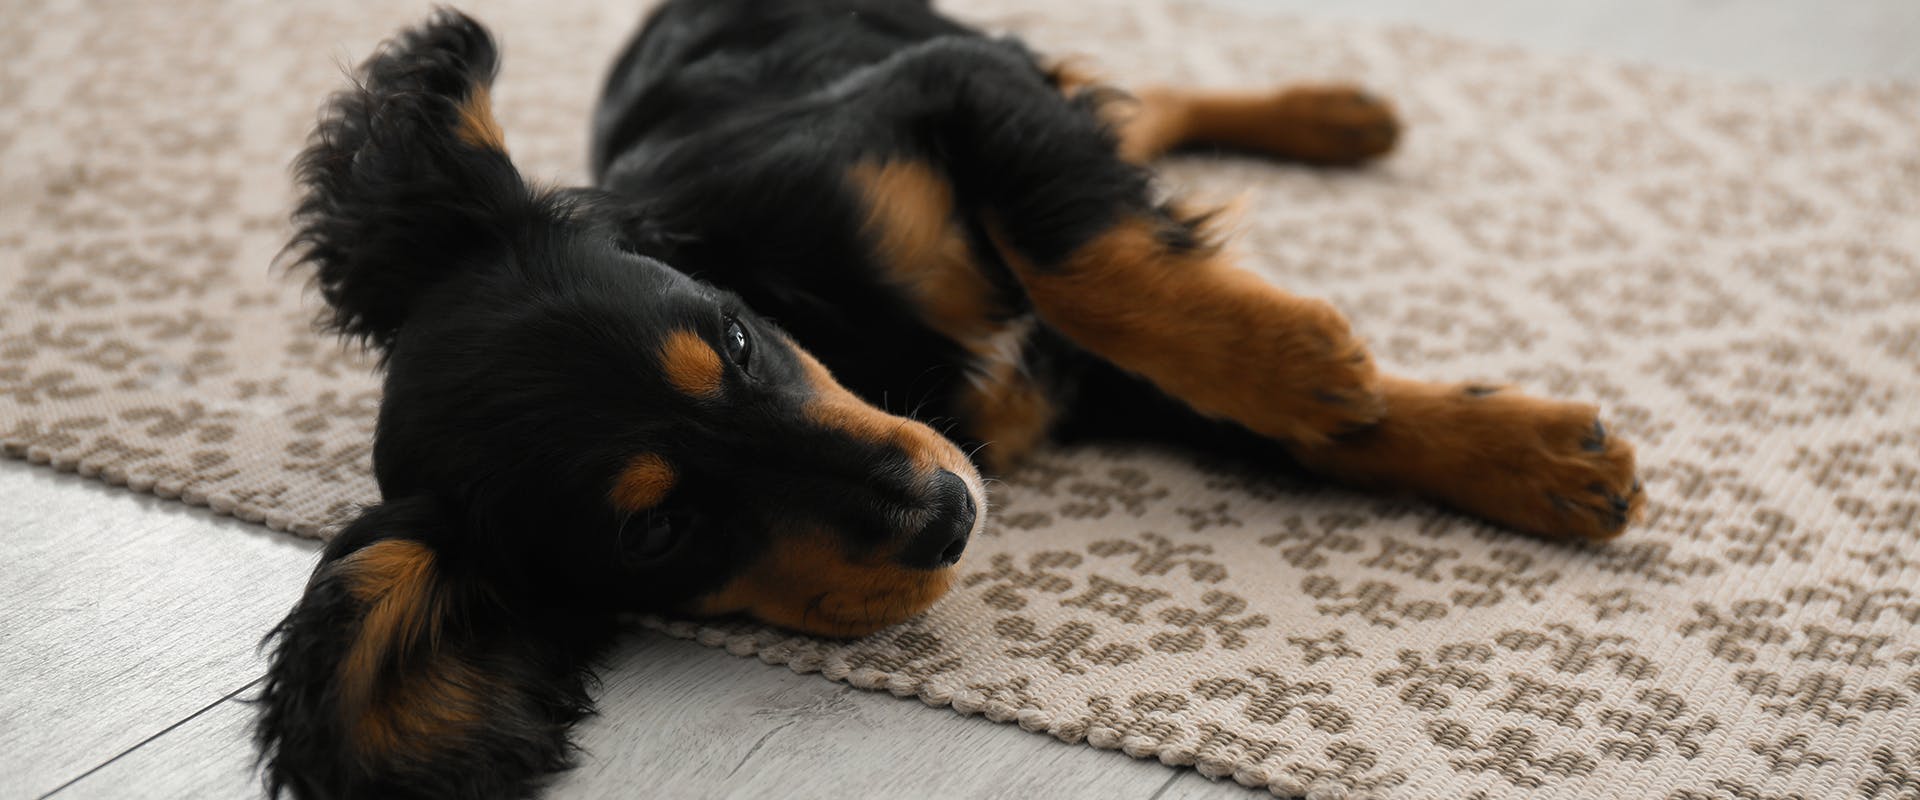 A small Gordon Setter puppy with floppy ears laying on a rug